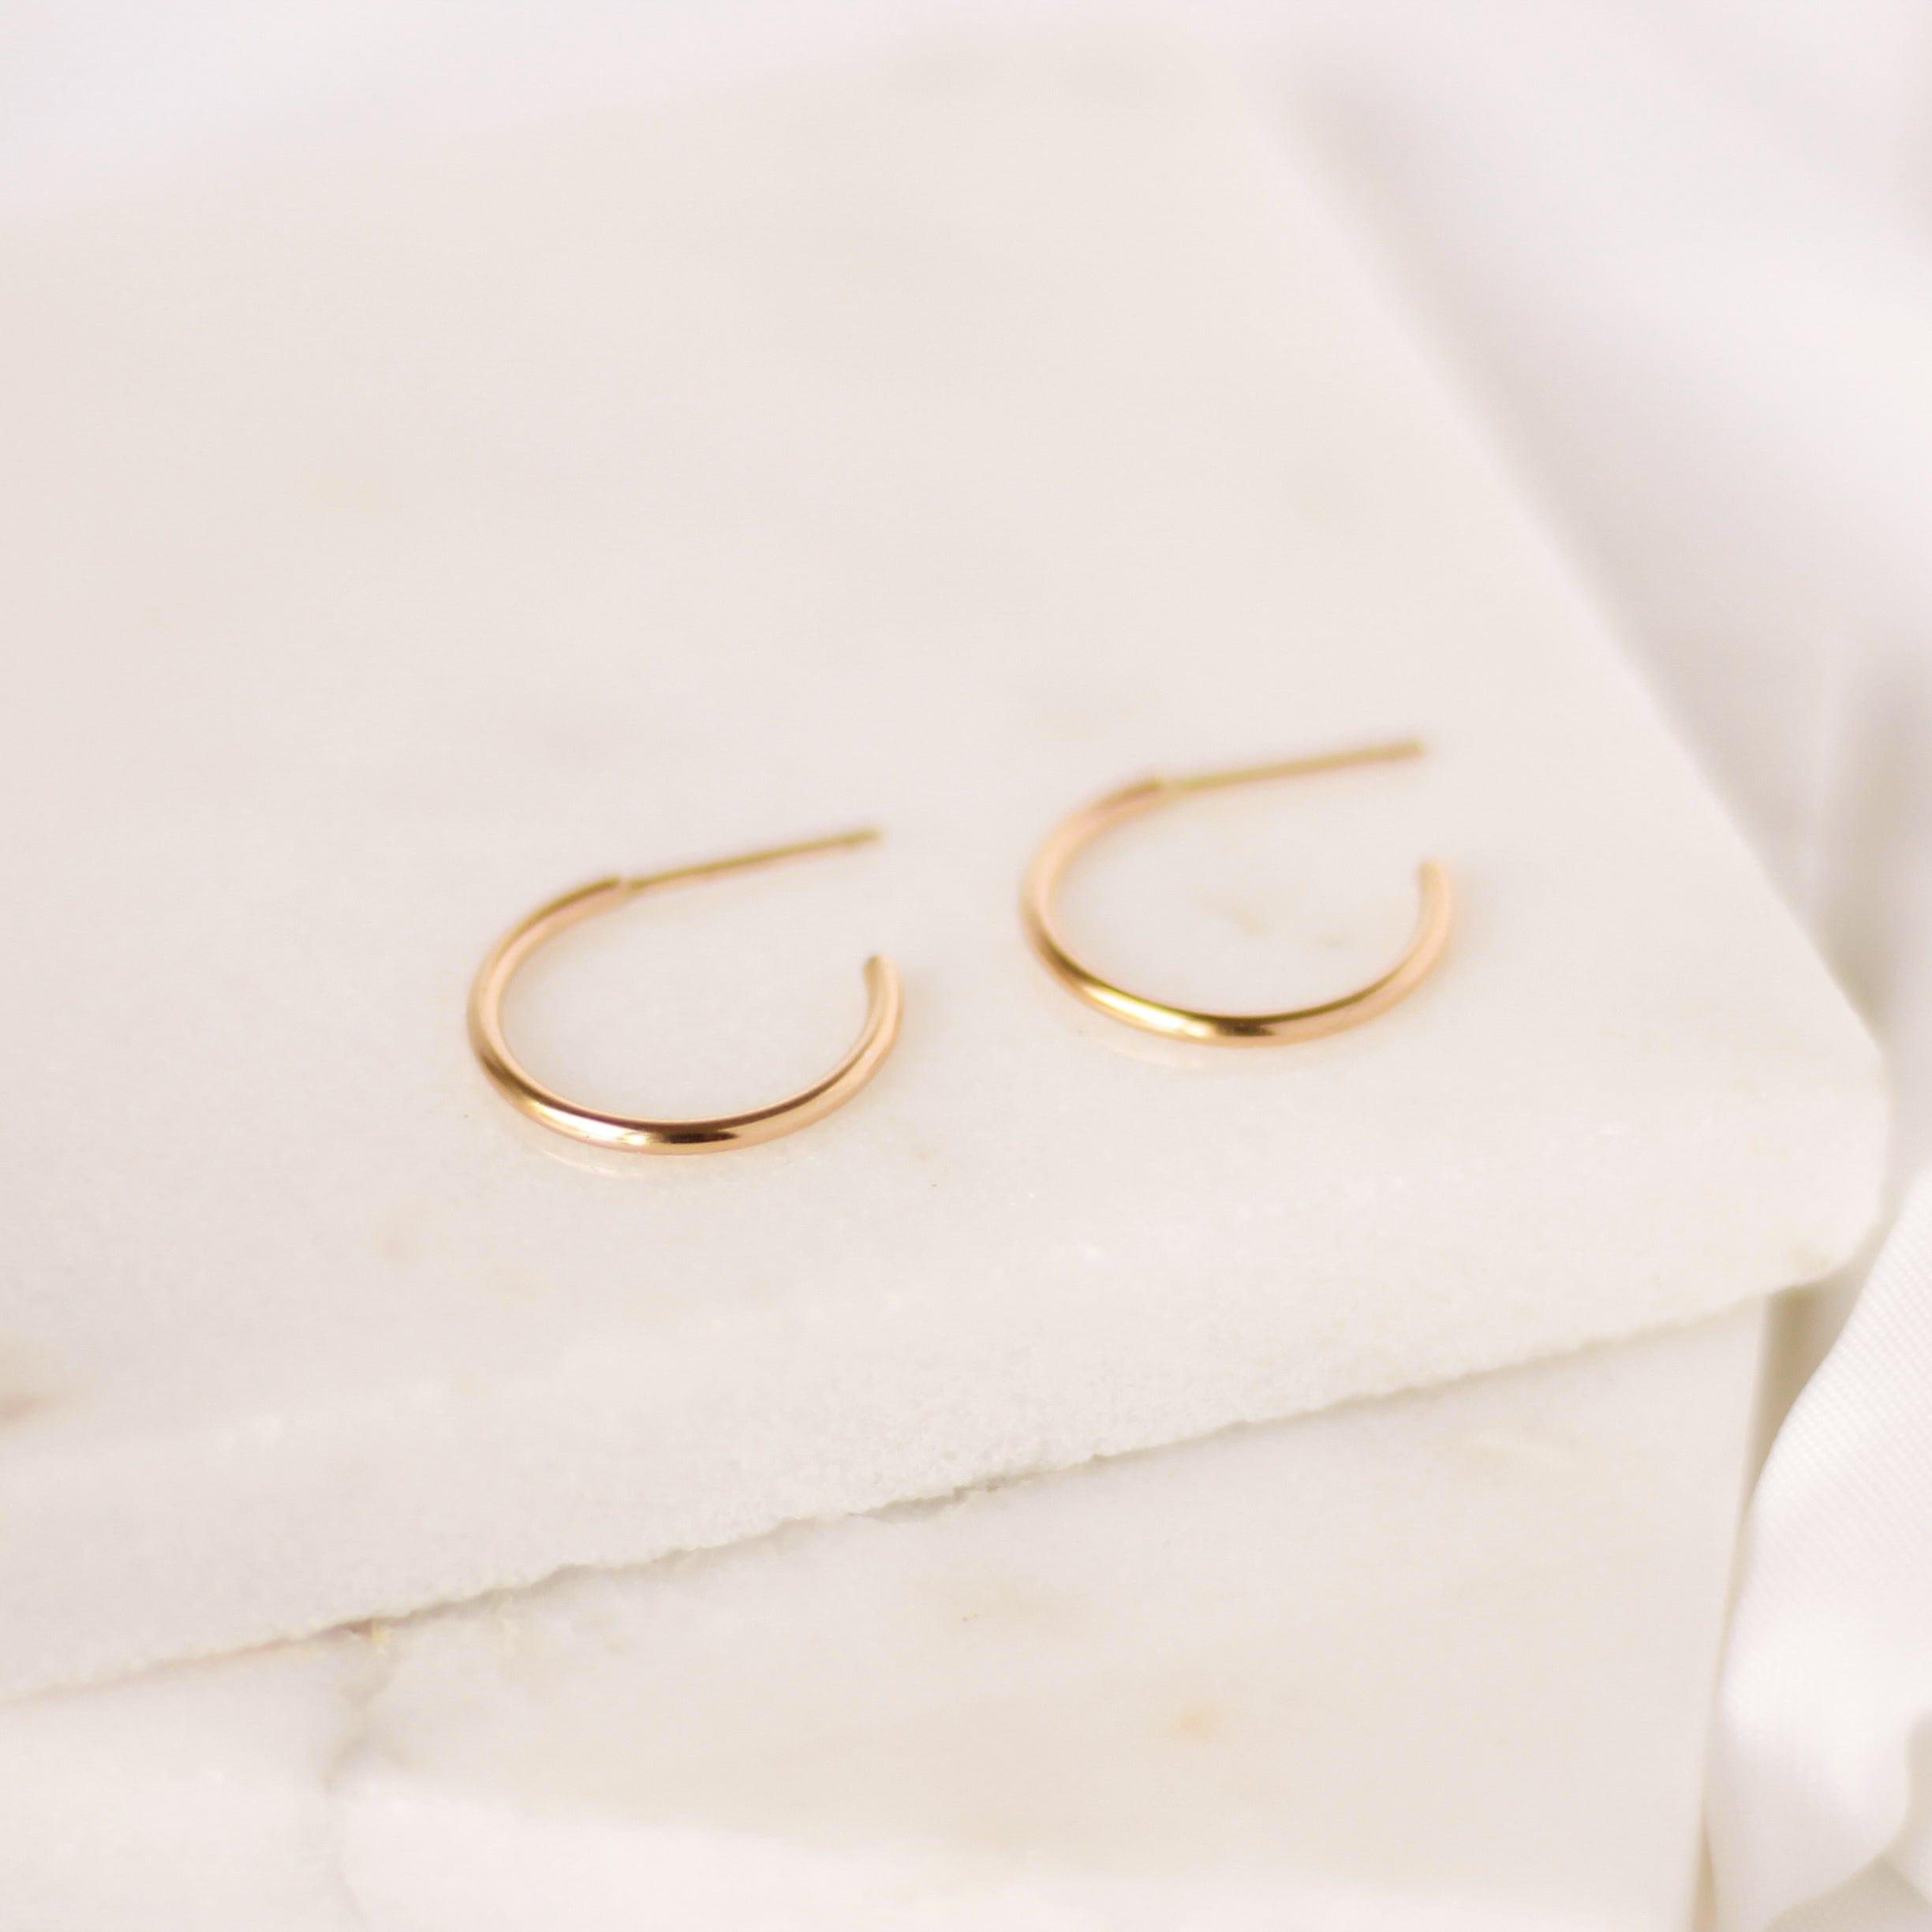 Small Everyday Hoop Earrings - Nolia Jewelry - Meaningful + Sustainably Handcrafted Jewelry